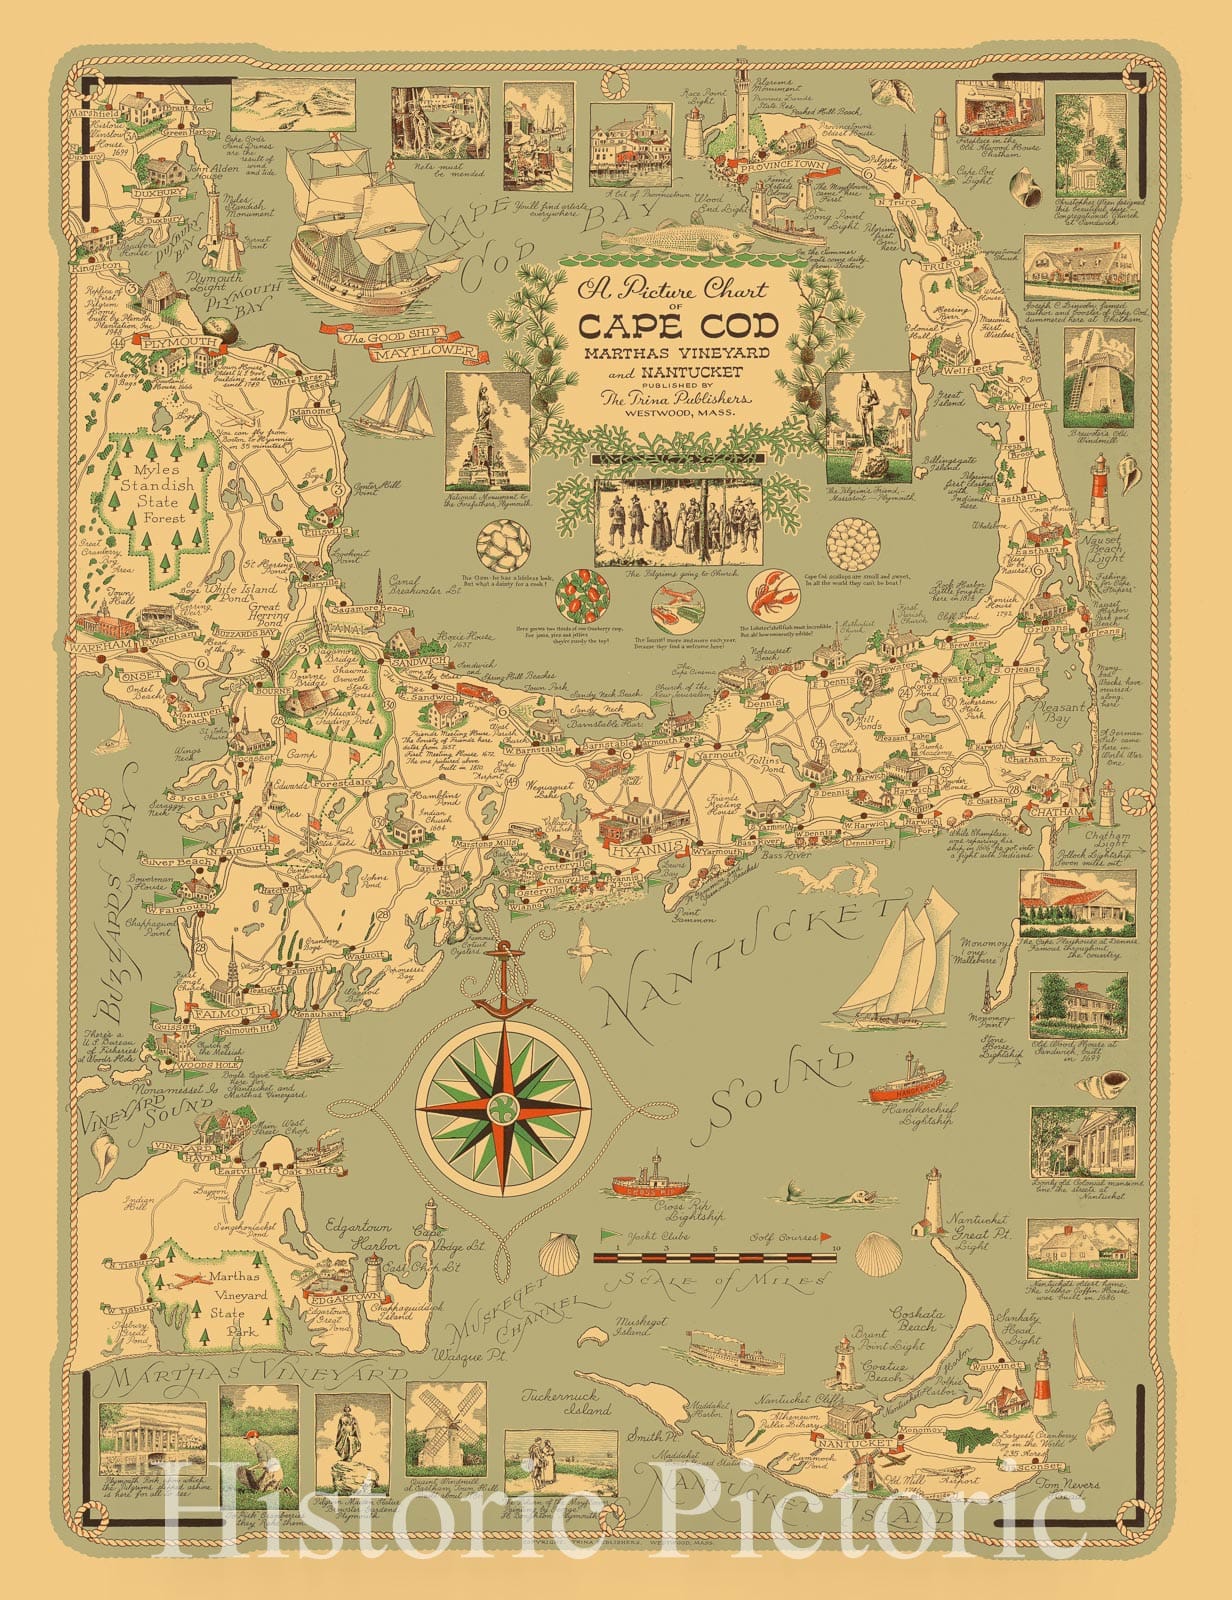 Map : Cape Cod, Mass. 1940, A picture chart of Cape Cod, Martha's Vineyard and Nantucket , Antique Vintage Reproduction